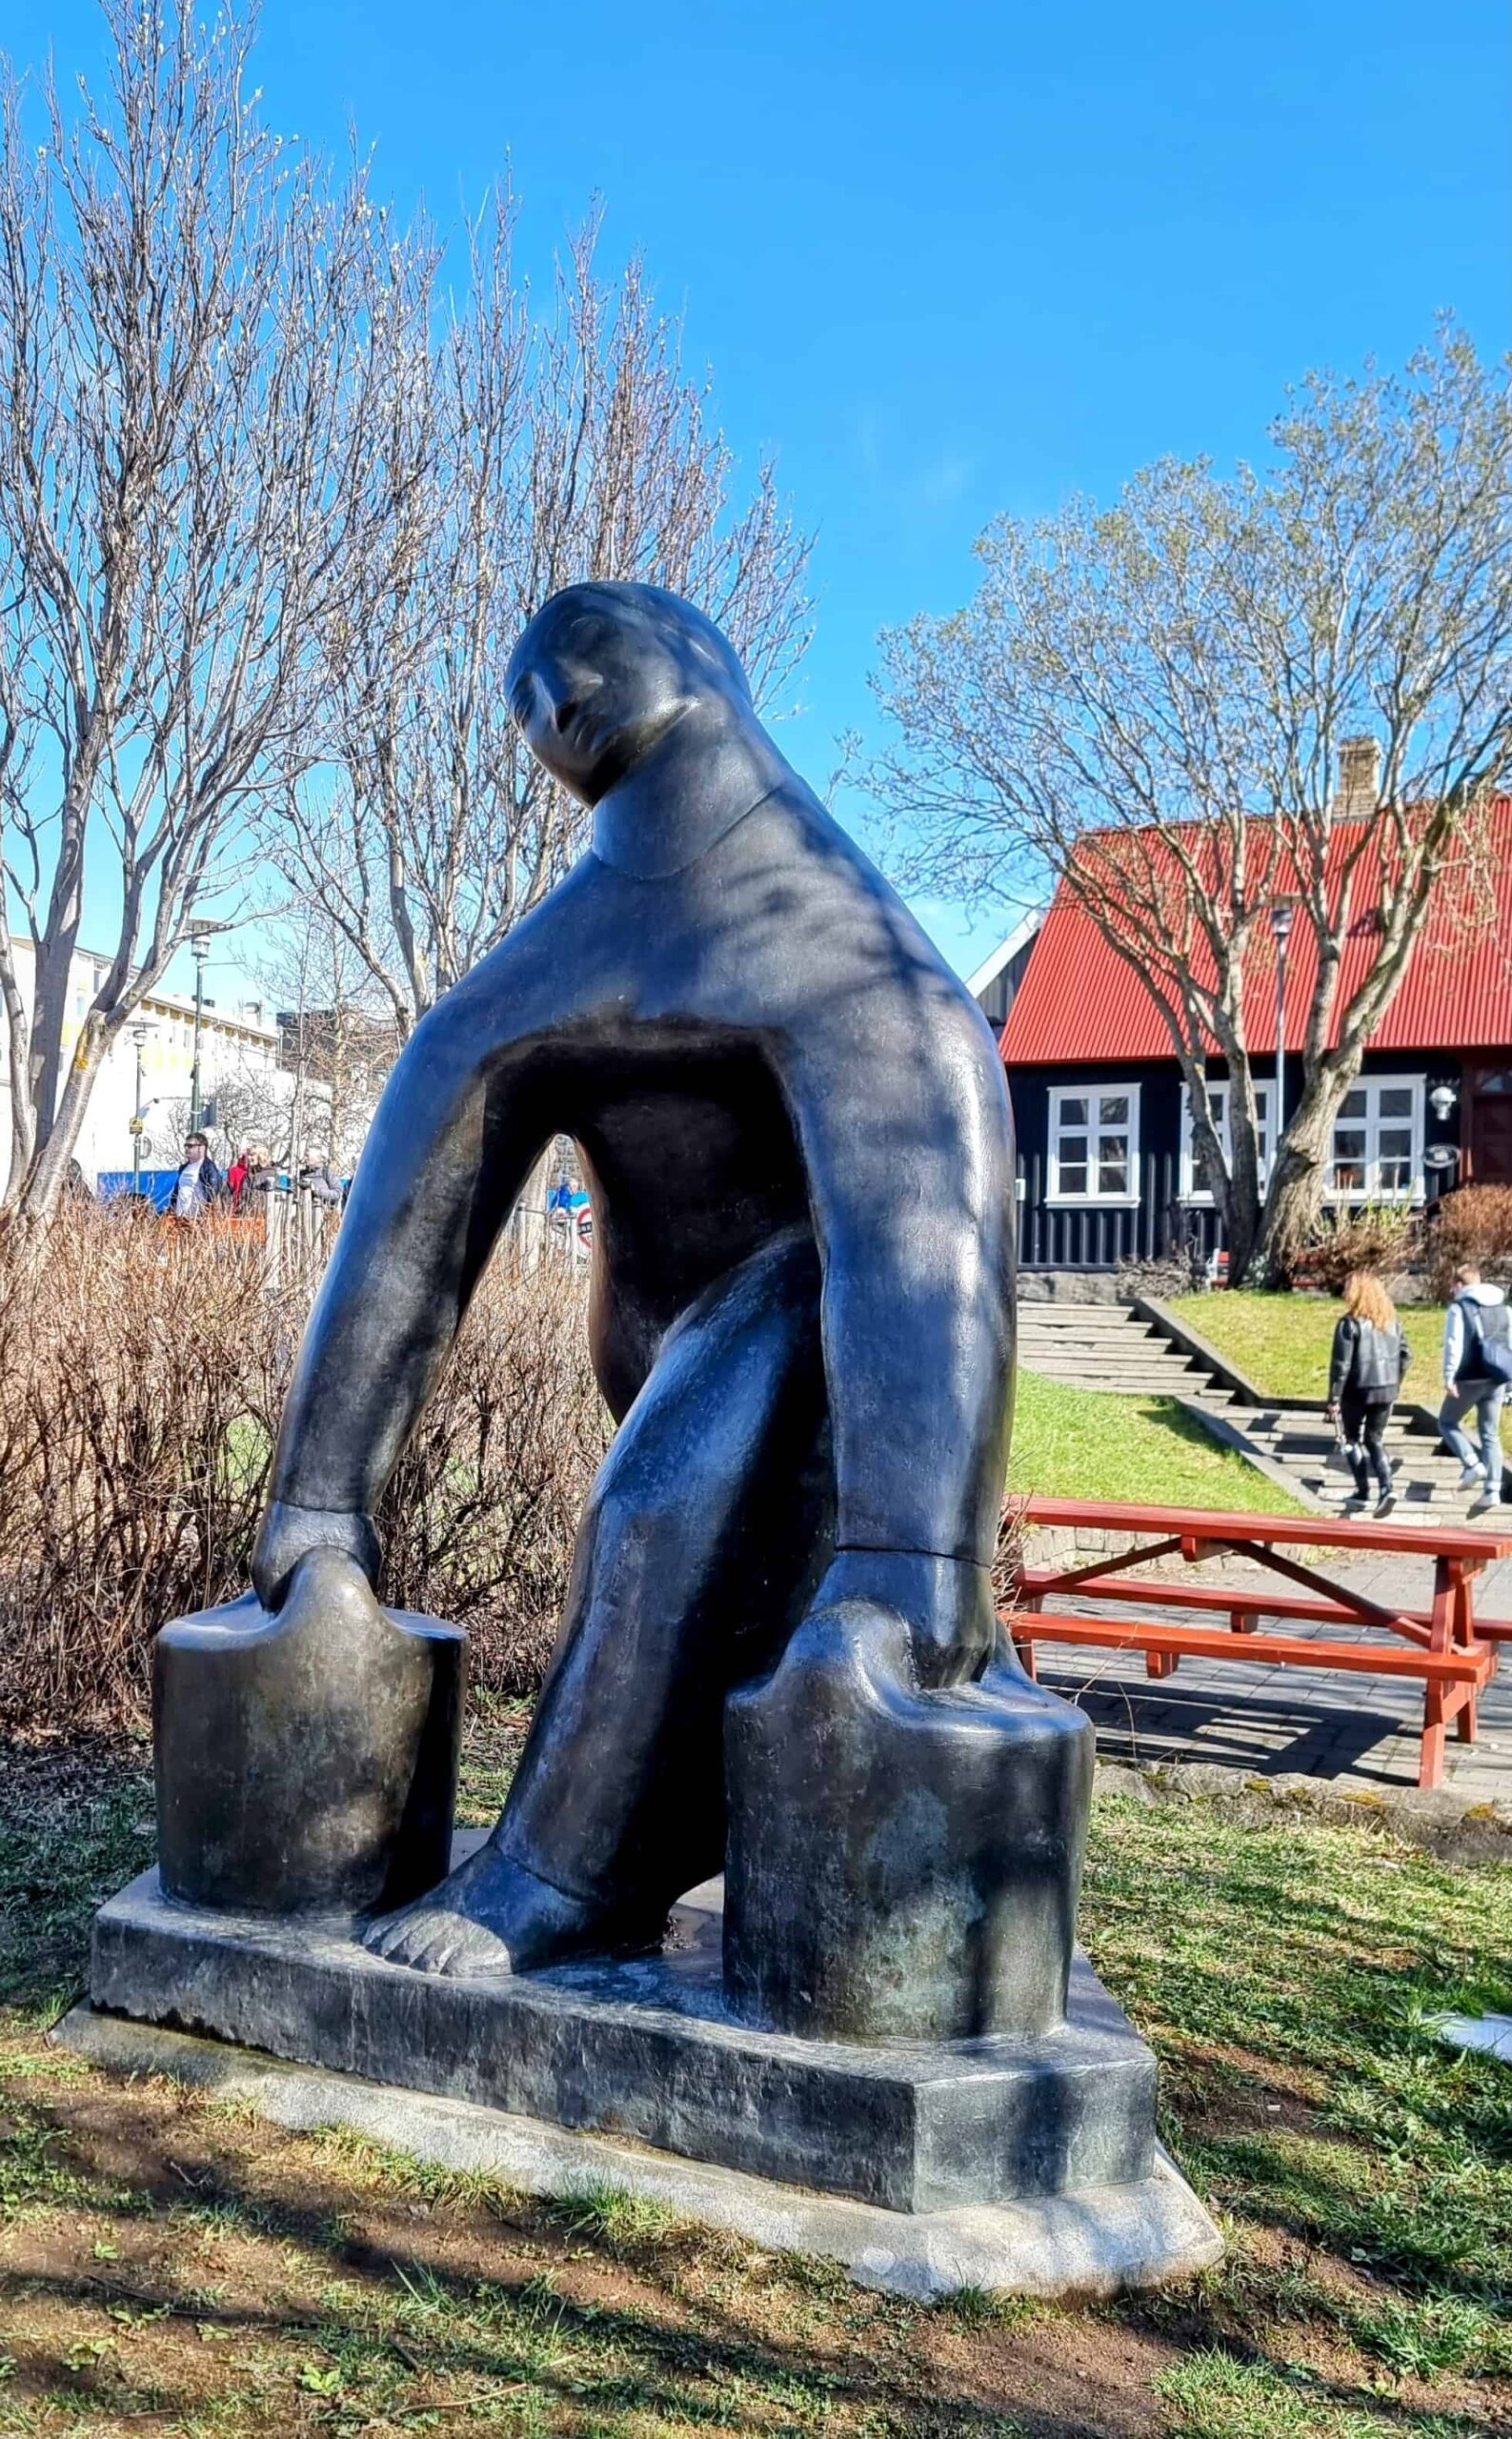 A picture of the Vatnsberinn Statue in Reykjavik - showing a woman carrying 2 water buckets